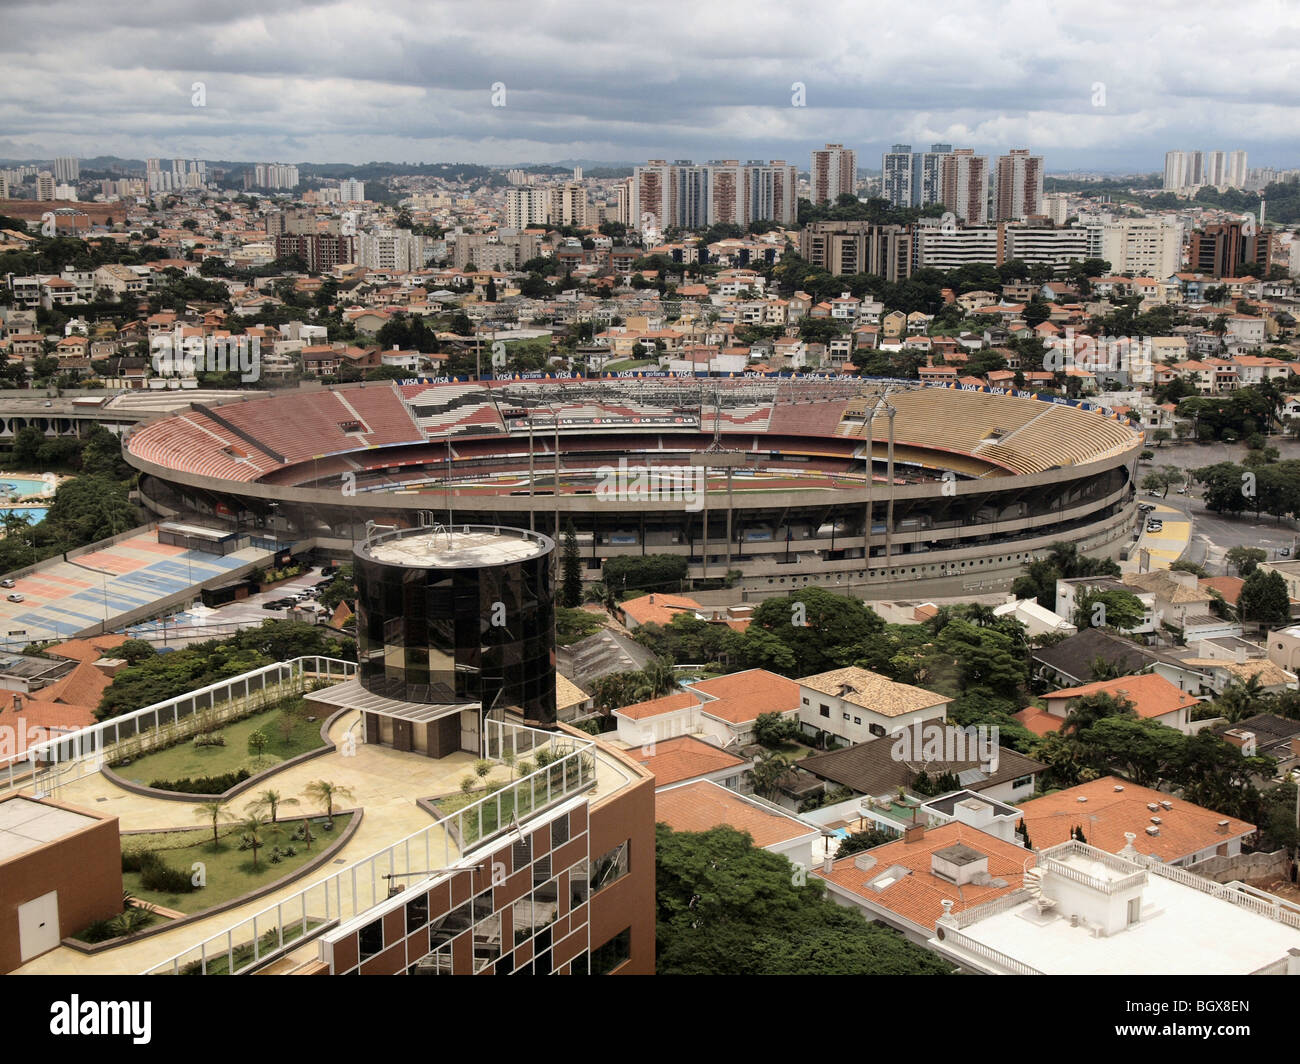 Morumbi football stadium in the city of Sao Paulo in Brazil which is one of those that will be used for the World Cup in 2014 Stock Photo